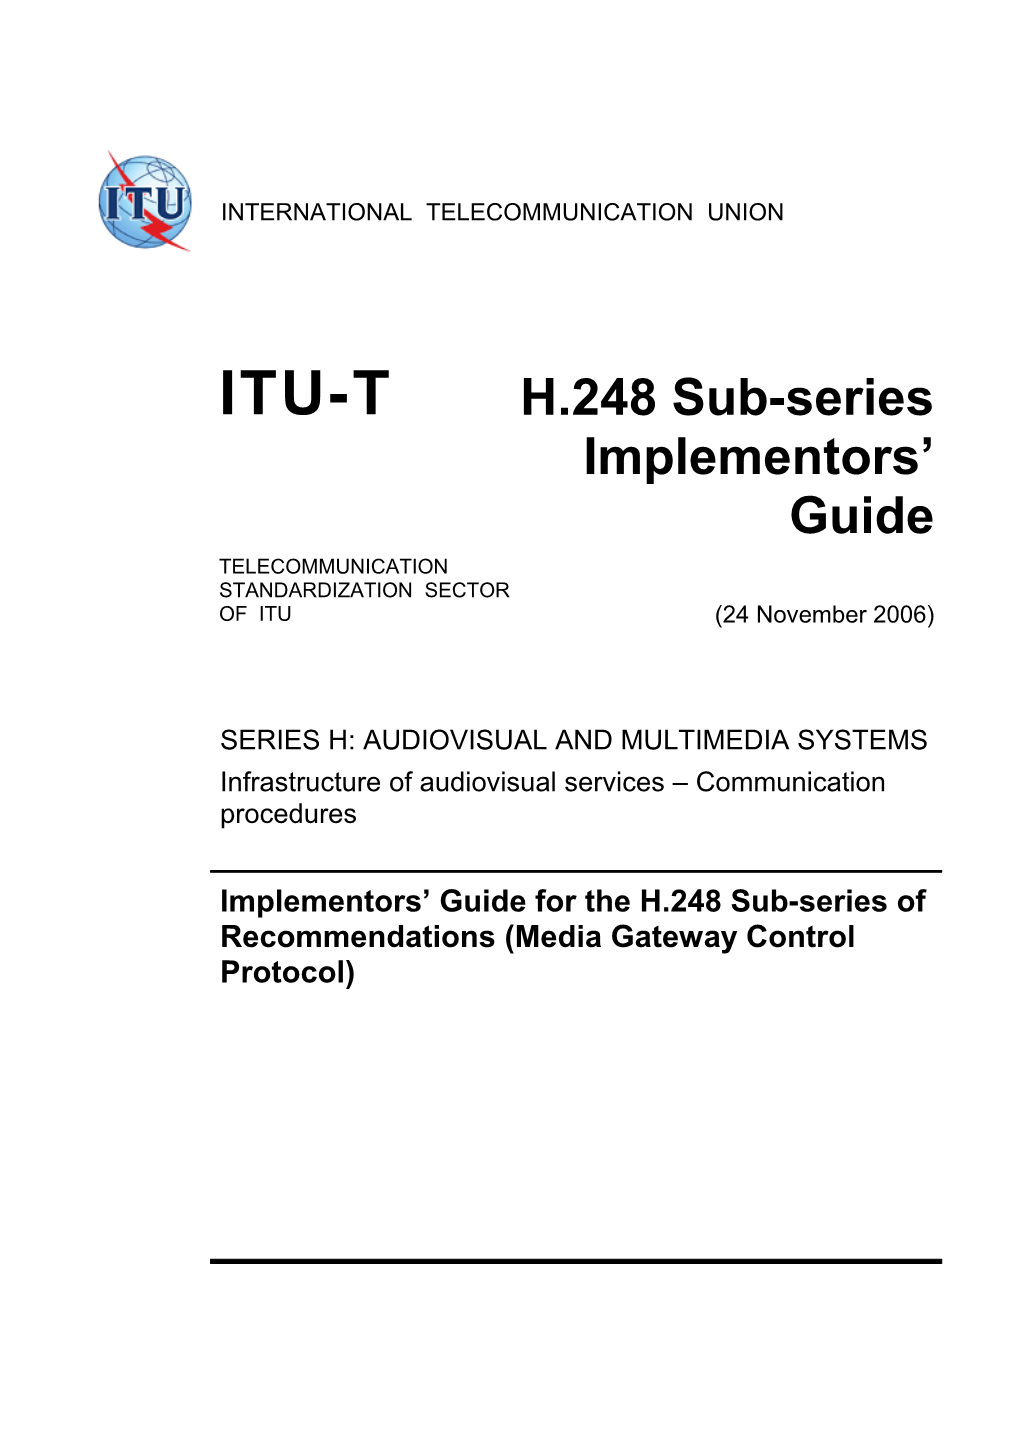 H.248 Sub-Series Implementors Guide